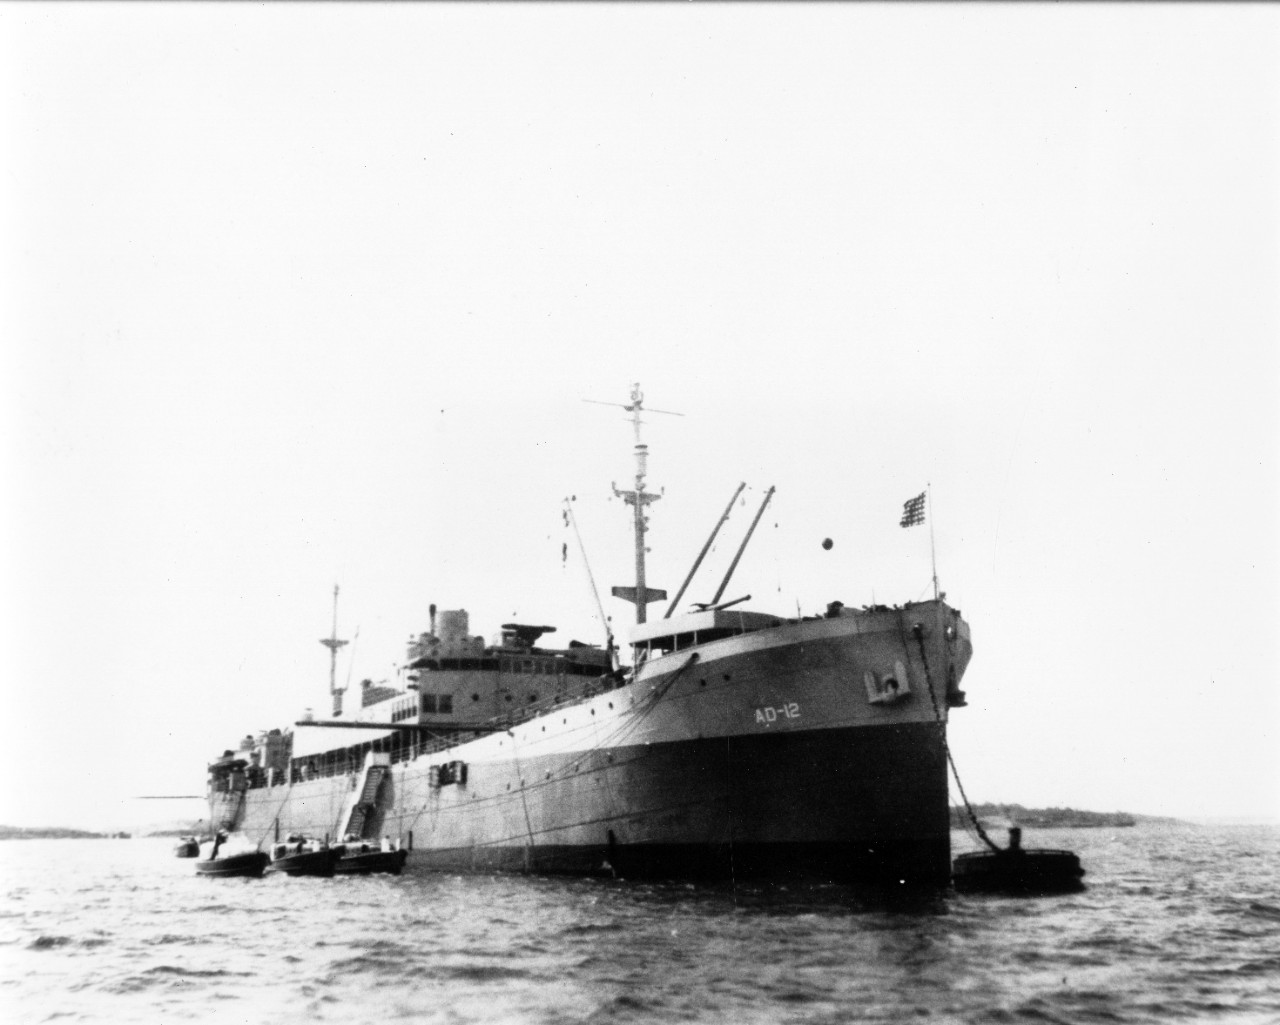 Single image donation of a b/w photo (copy) of USS Denebola (AD-12), circa WWII. 